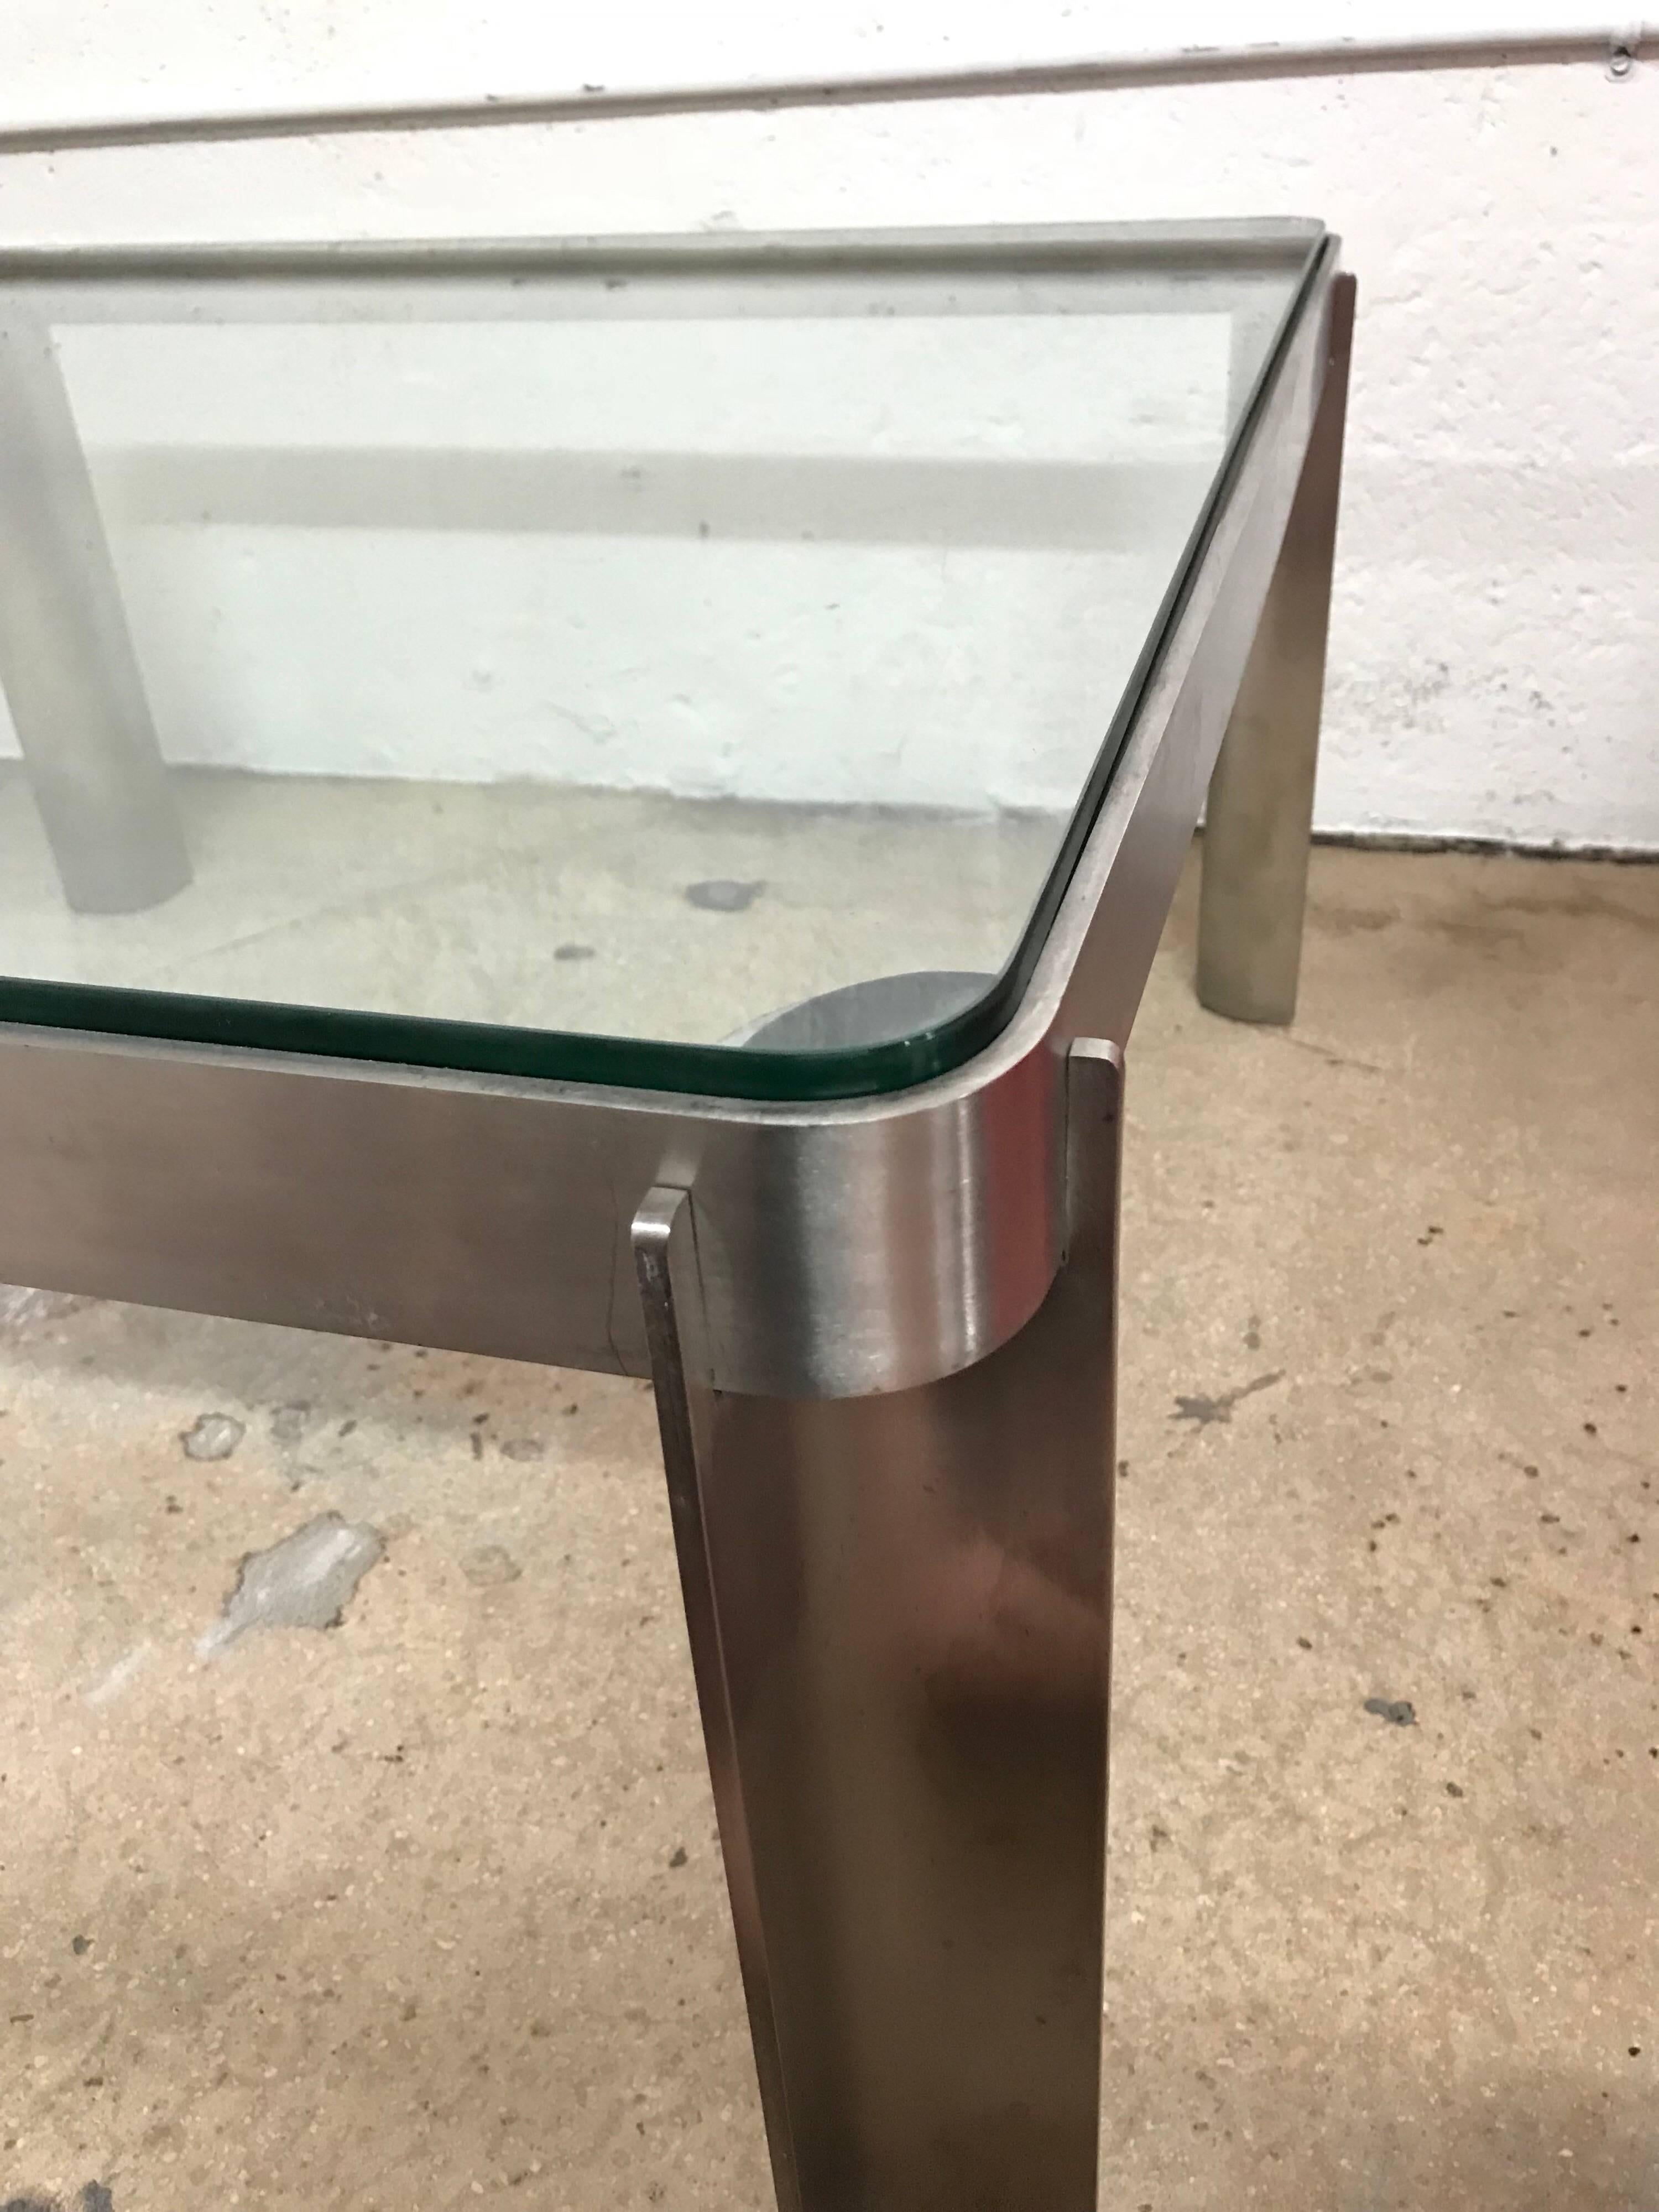 Post Modern Italian Steel and Glass Coffee or Cocktail Table, Italy, circa 1980s For Sale 5